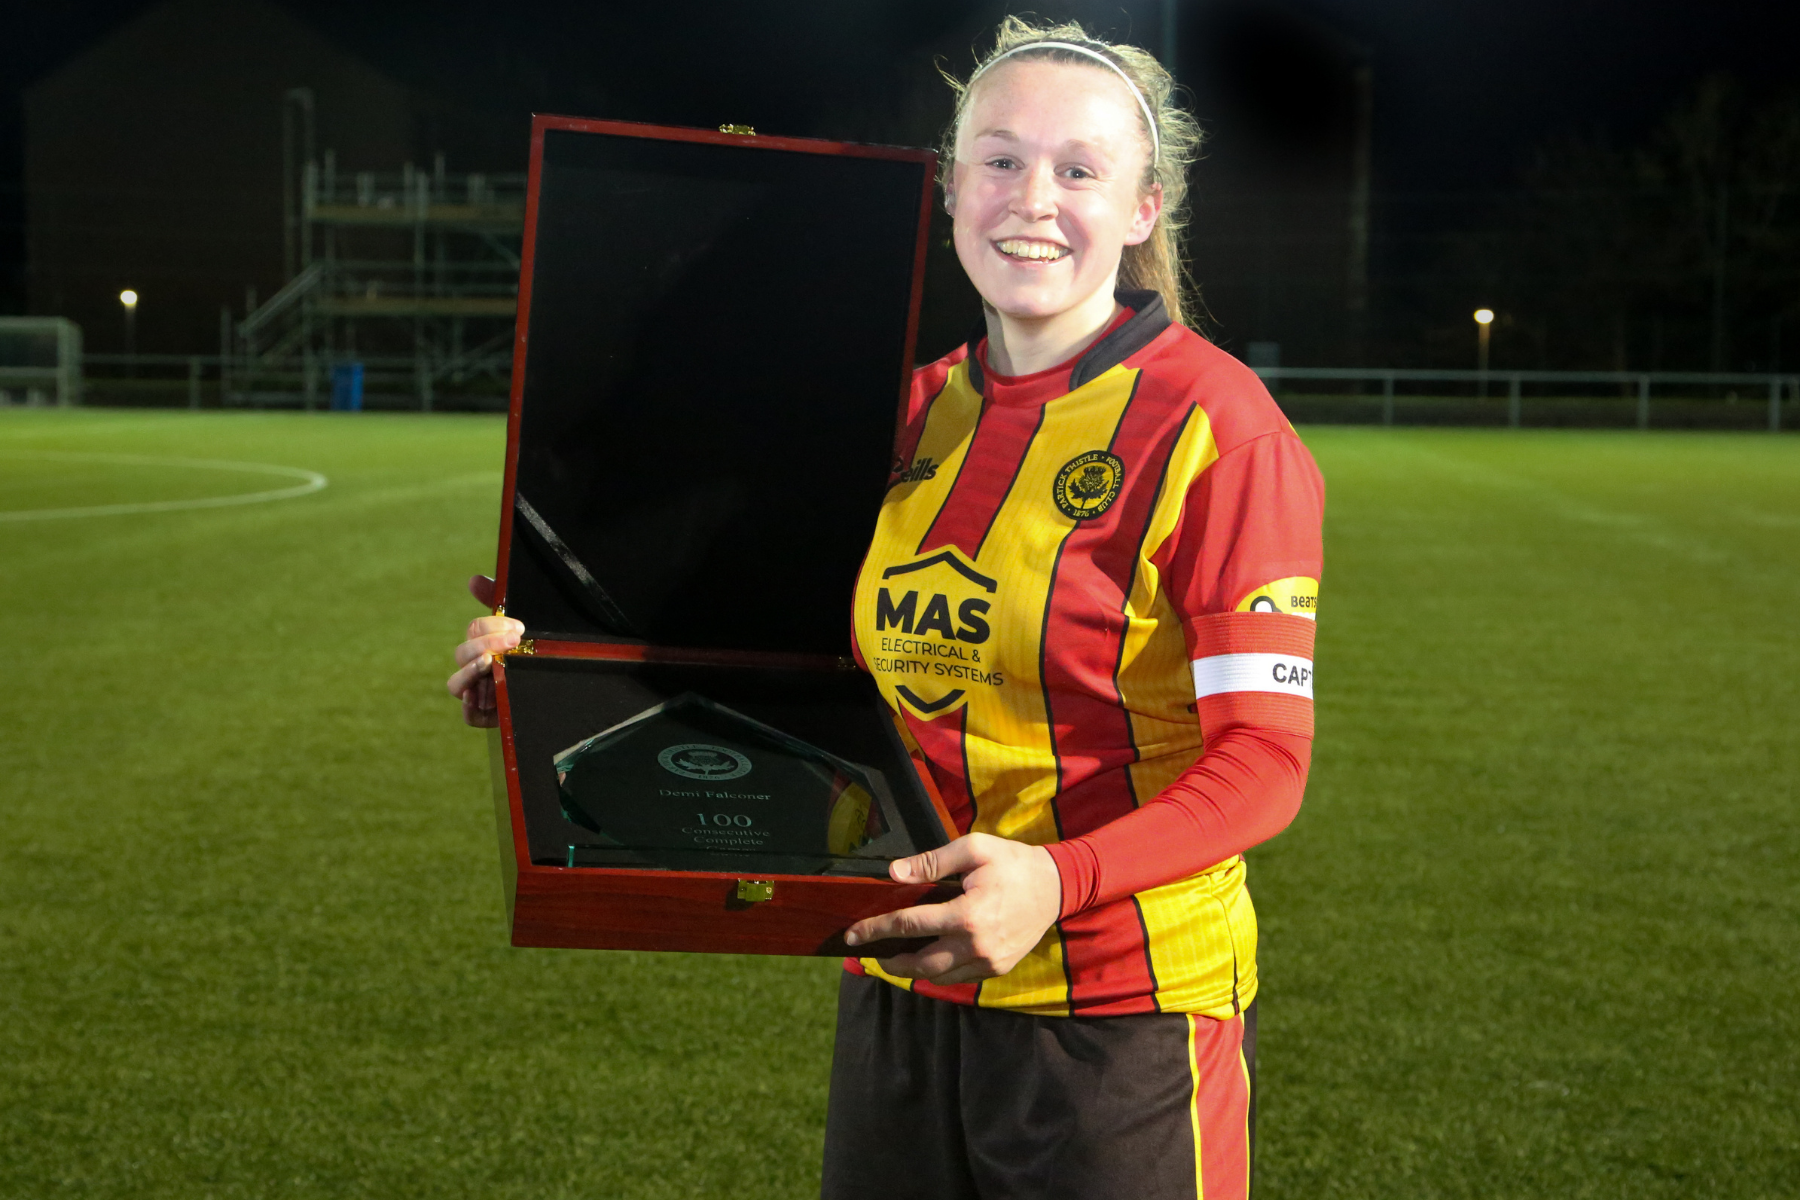 Partick Thistle present Demi Falconer with award after incredible 100 consecutive games achievement